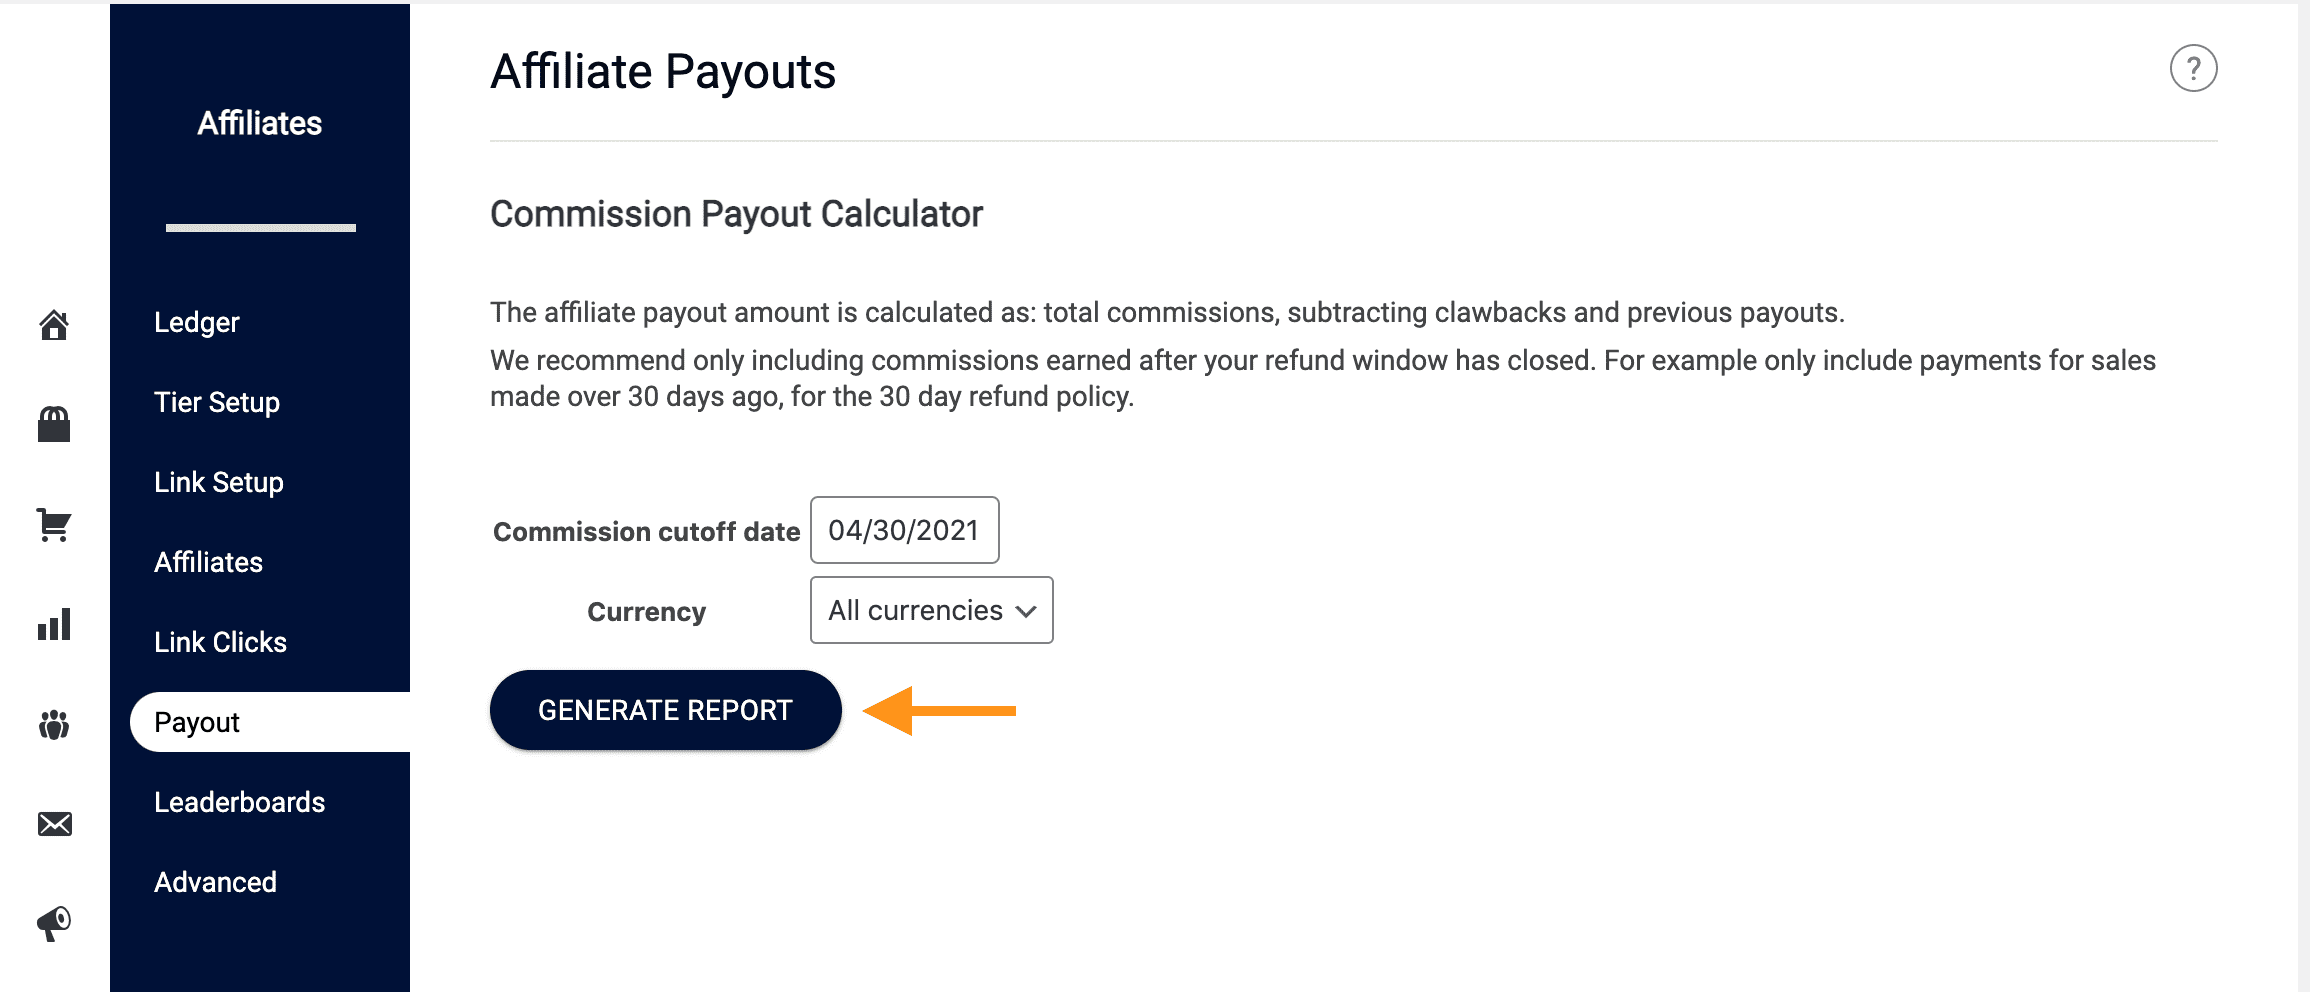 generate the affiliate payout report